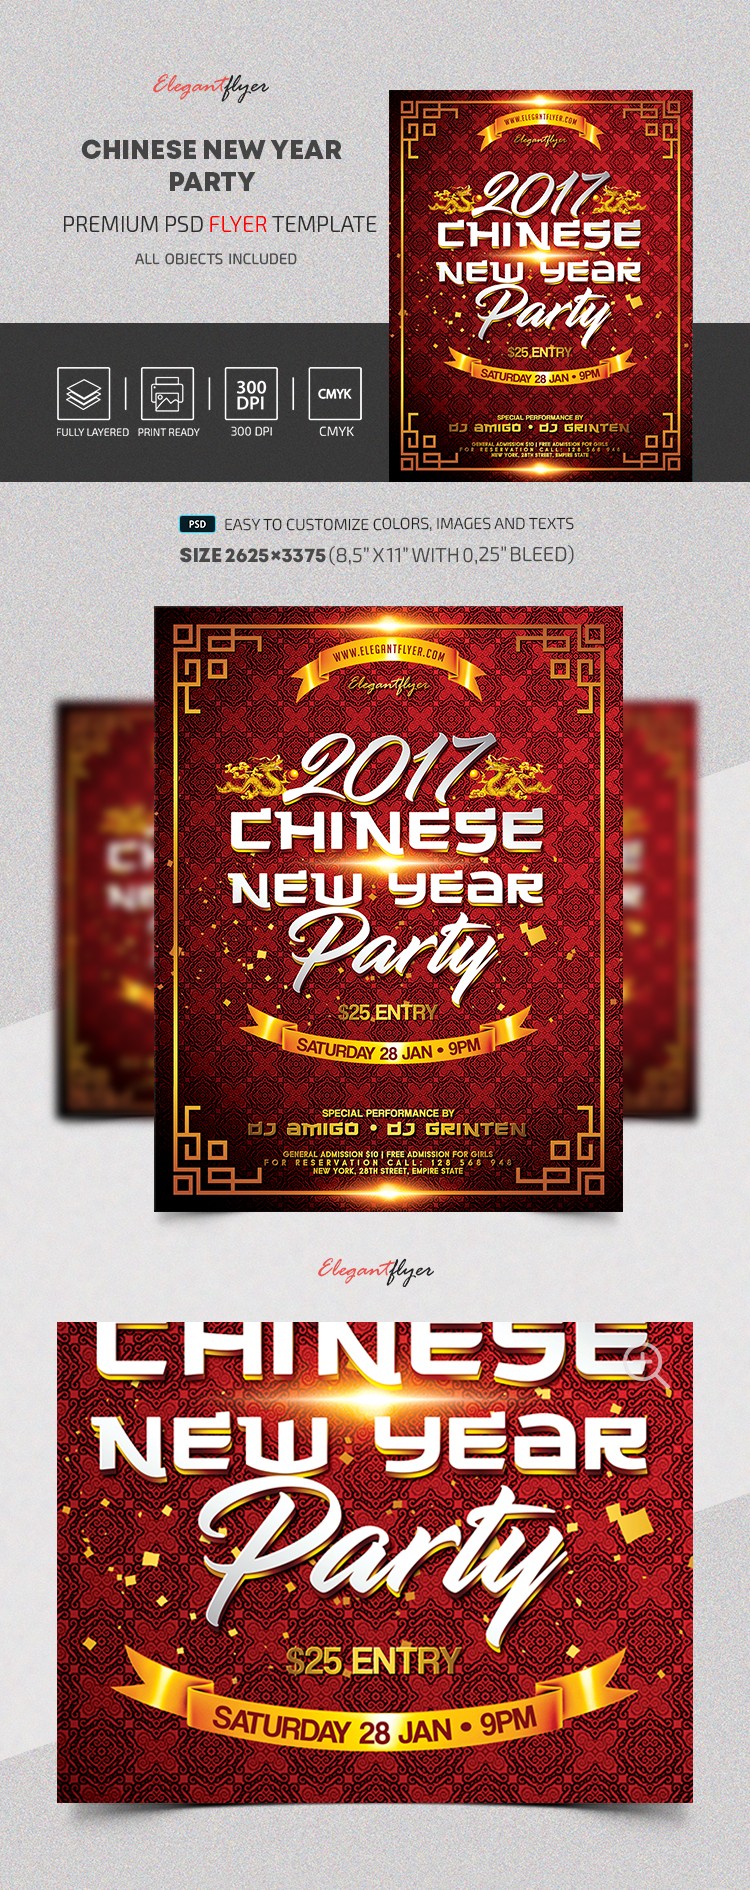 Chinese New Year Party by ElegantFlyer